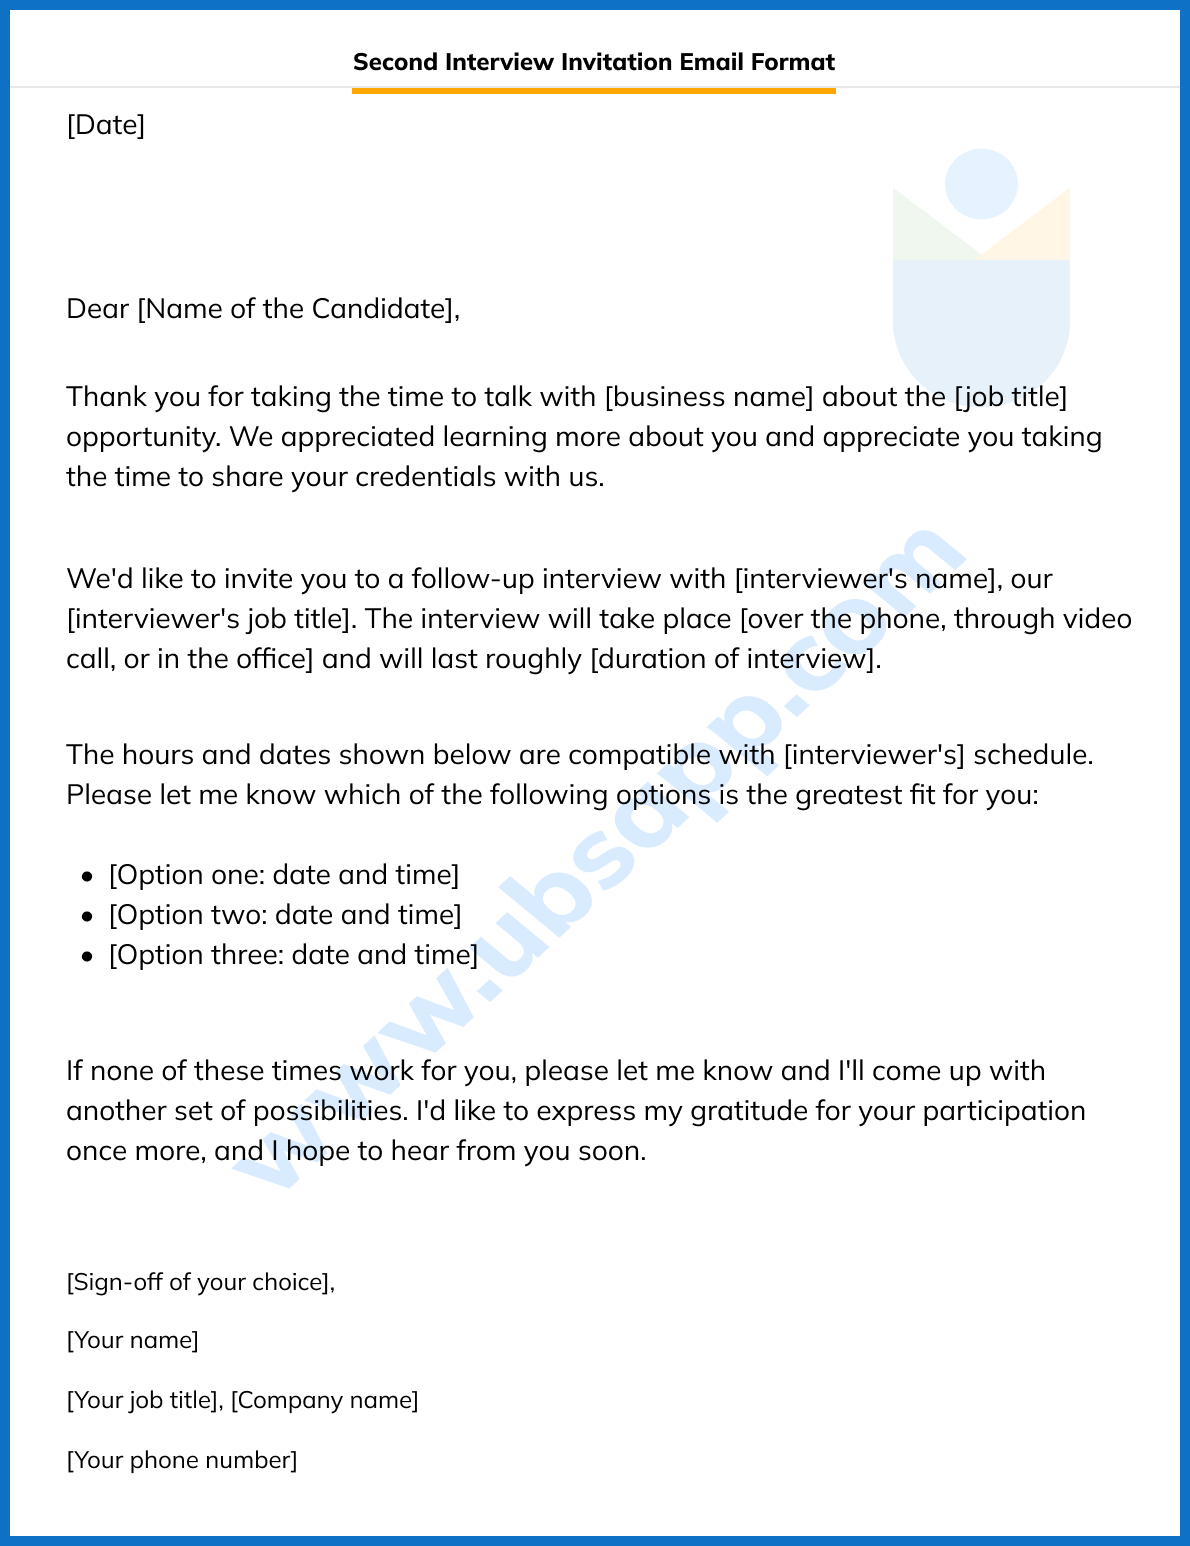 Second Interview Invitation Email Format, Meaning, Template, Examples